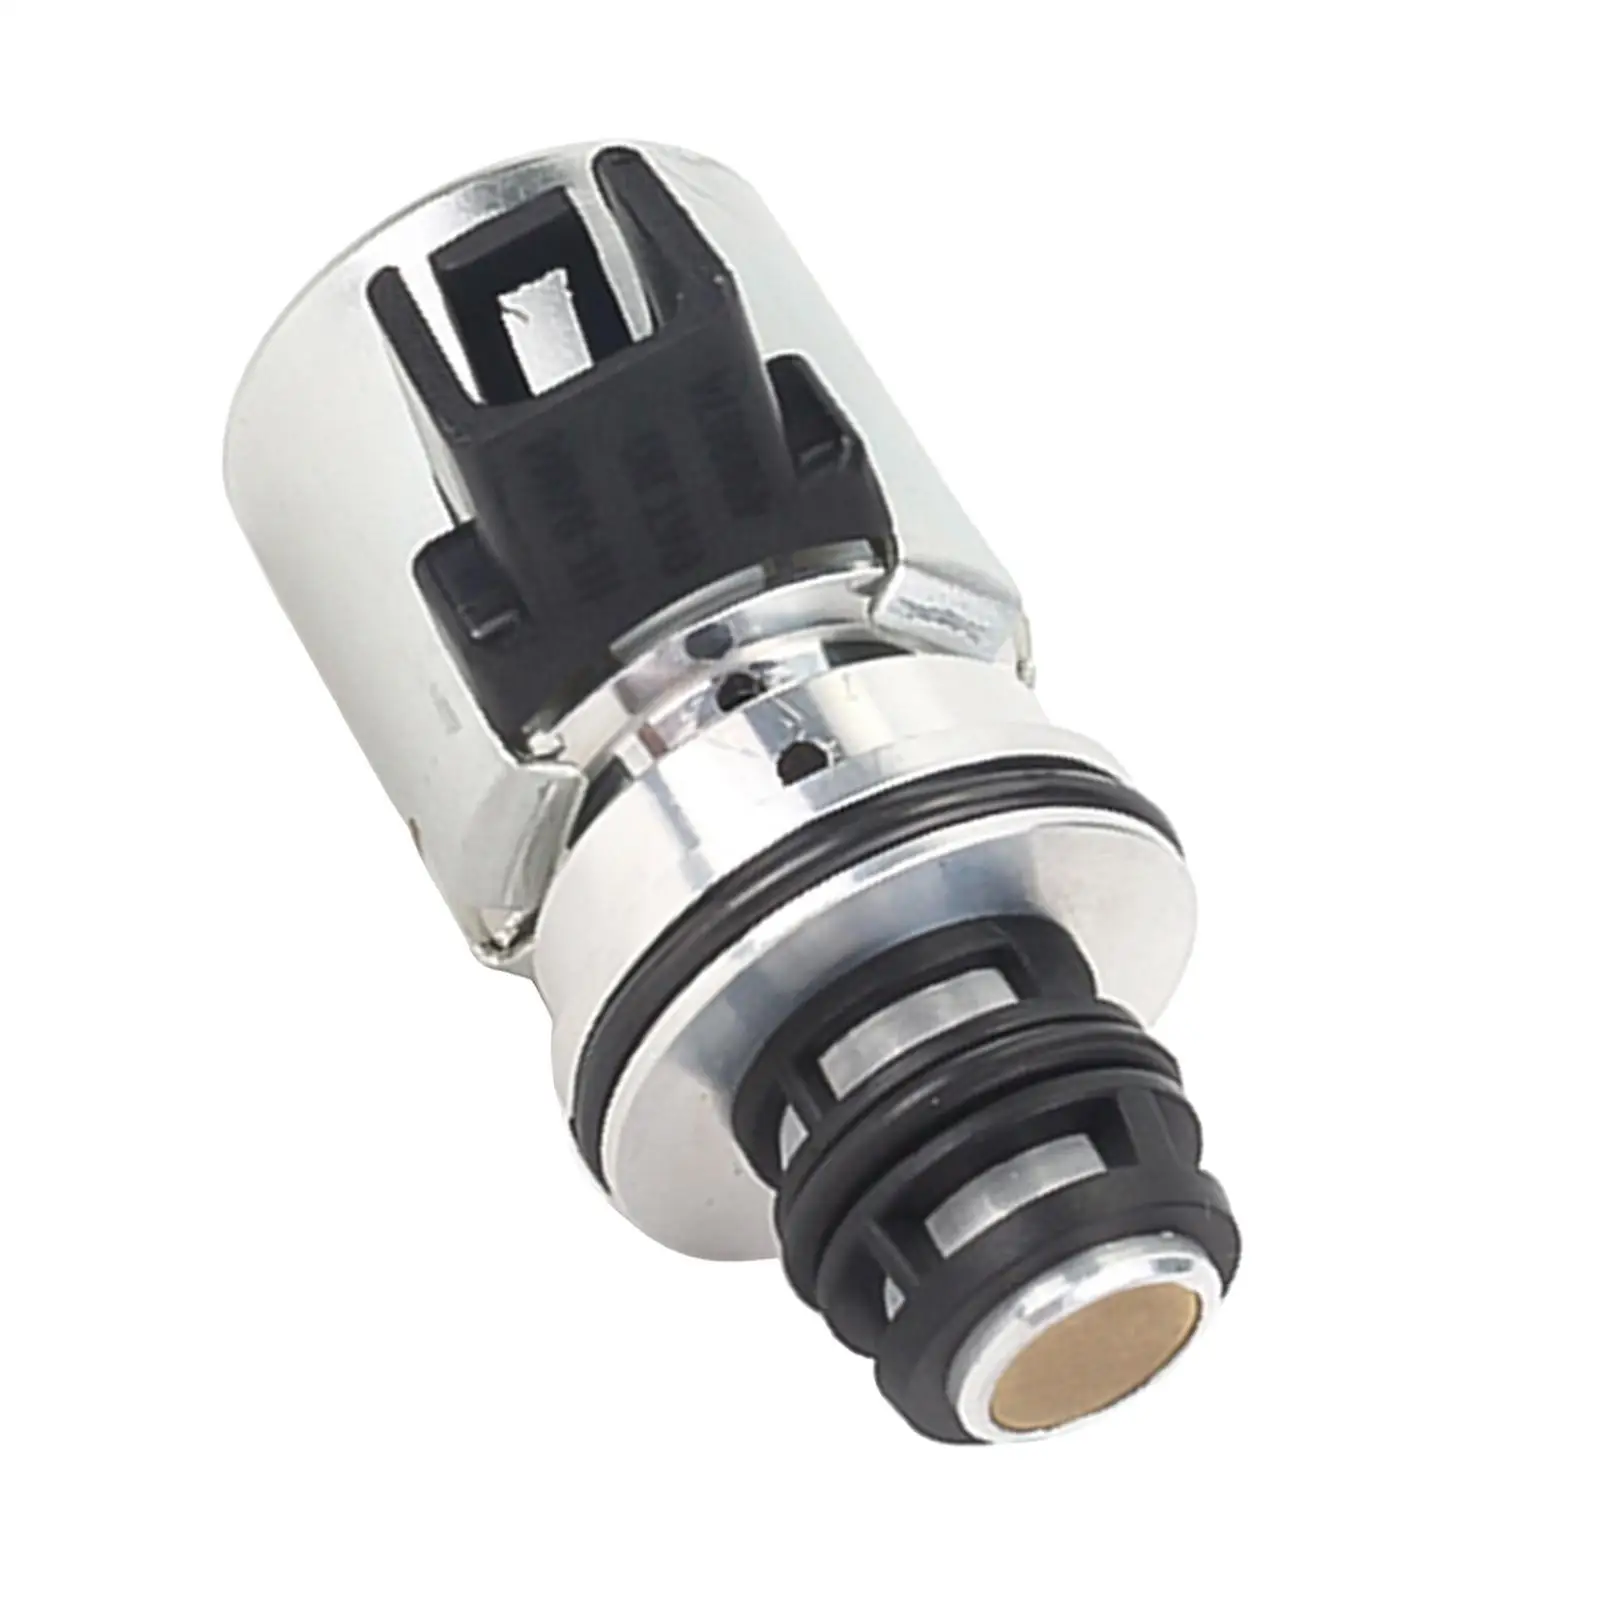 

A6184617210 Heavy Duty Transmission Governor Pressure Solenoid for 1993-2008,High quality material -lasting durability